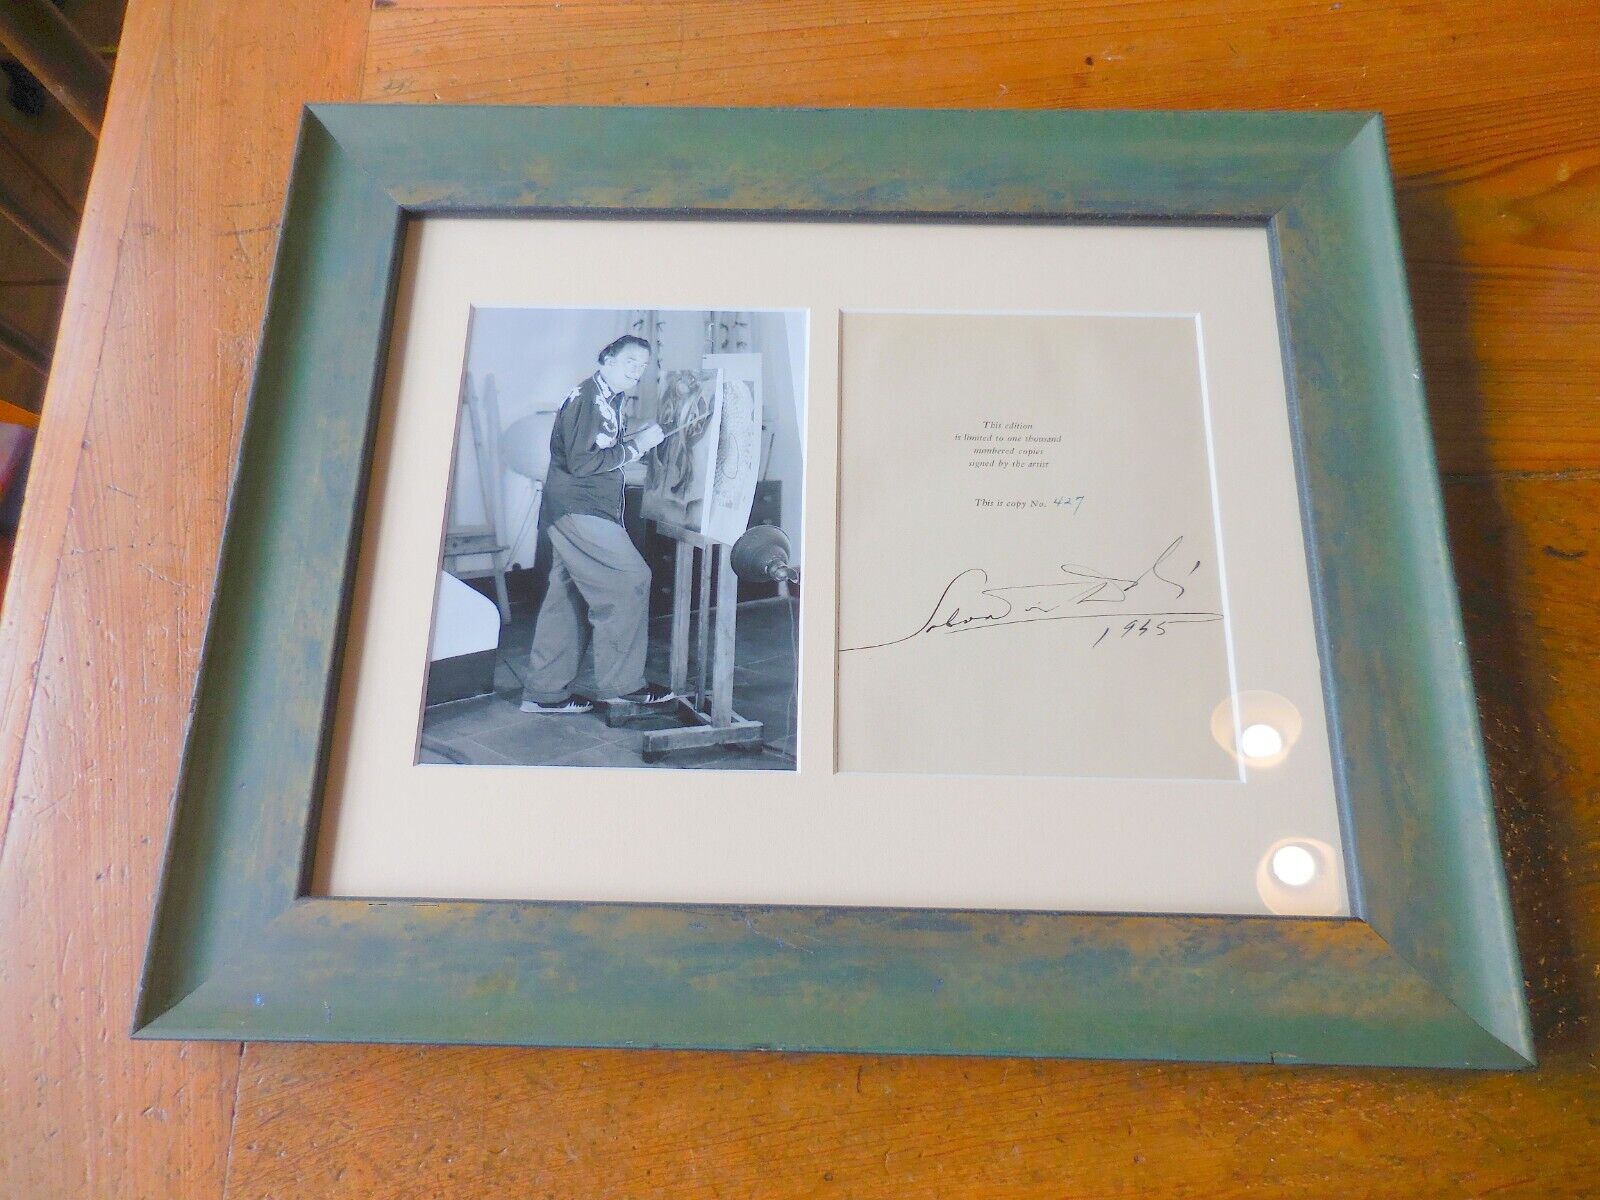 Salvador Dali Fountain Pen Signature Signed/Numbered Photograph Framed